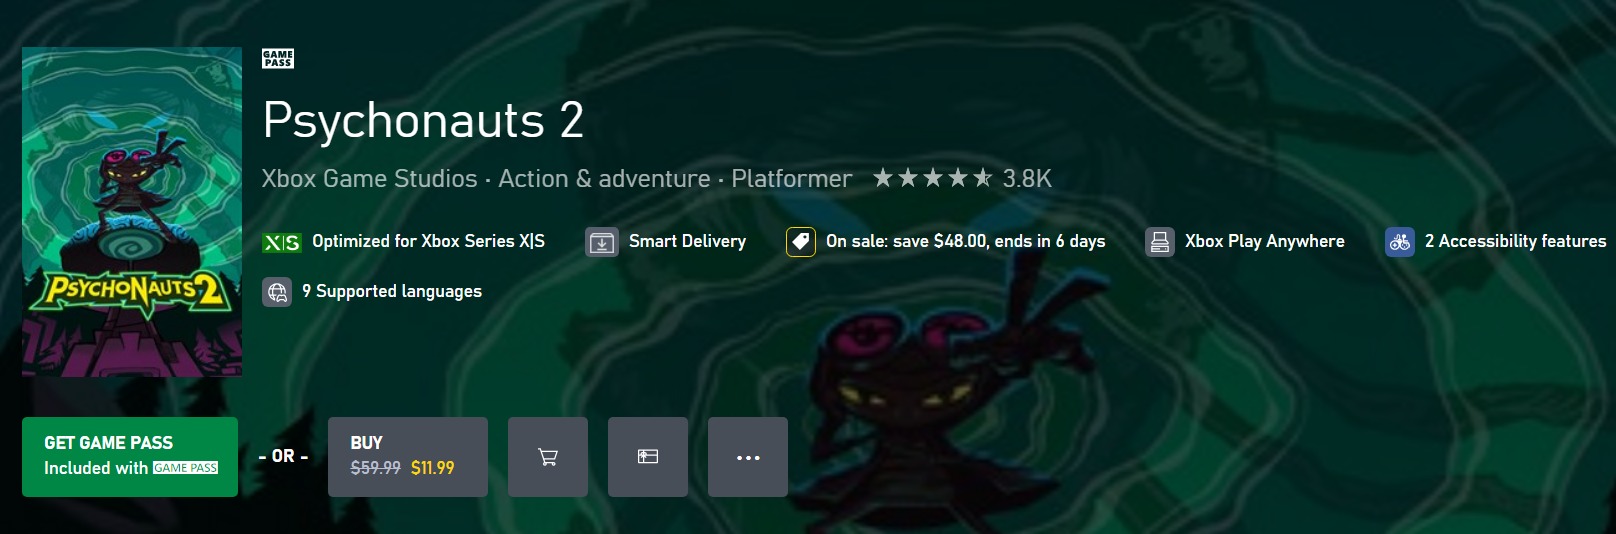 Psychonauts 2 is on a massive sale on the Xbox and PlayStation stores.